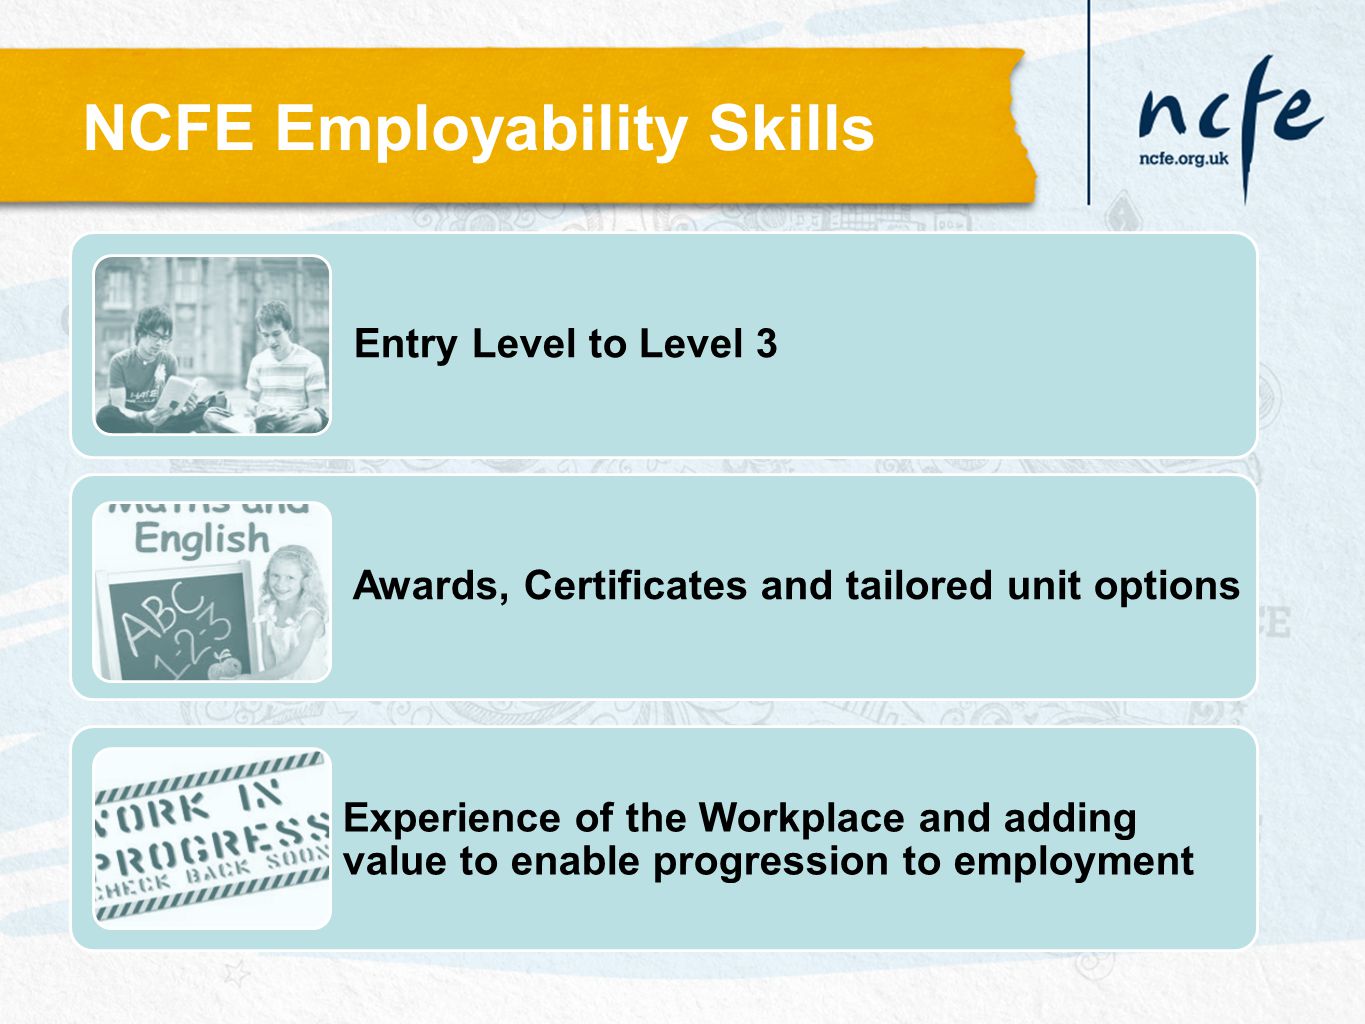 Entry Level to Level 3 Awards, Certificates and tailored unit options Experience of the Workplace and adding value to enable progression to employment NCFE Employability Skills